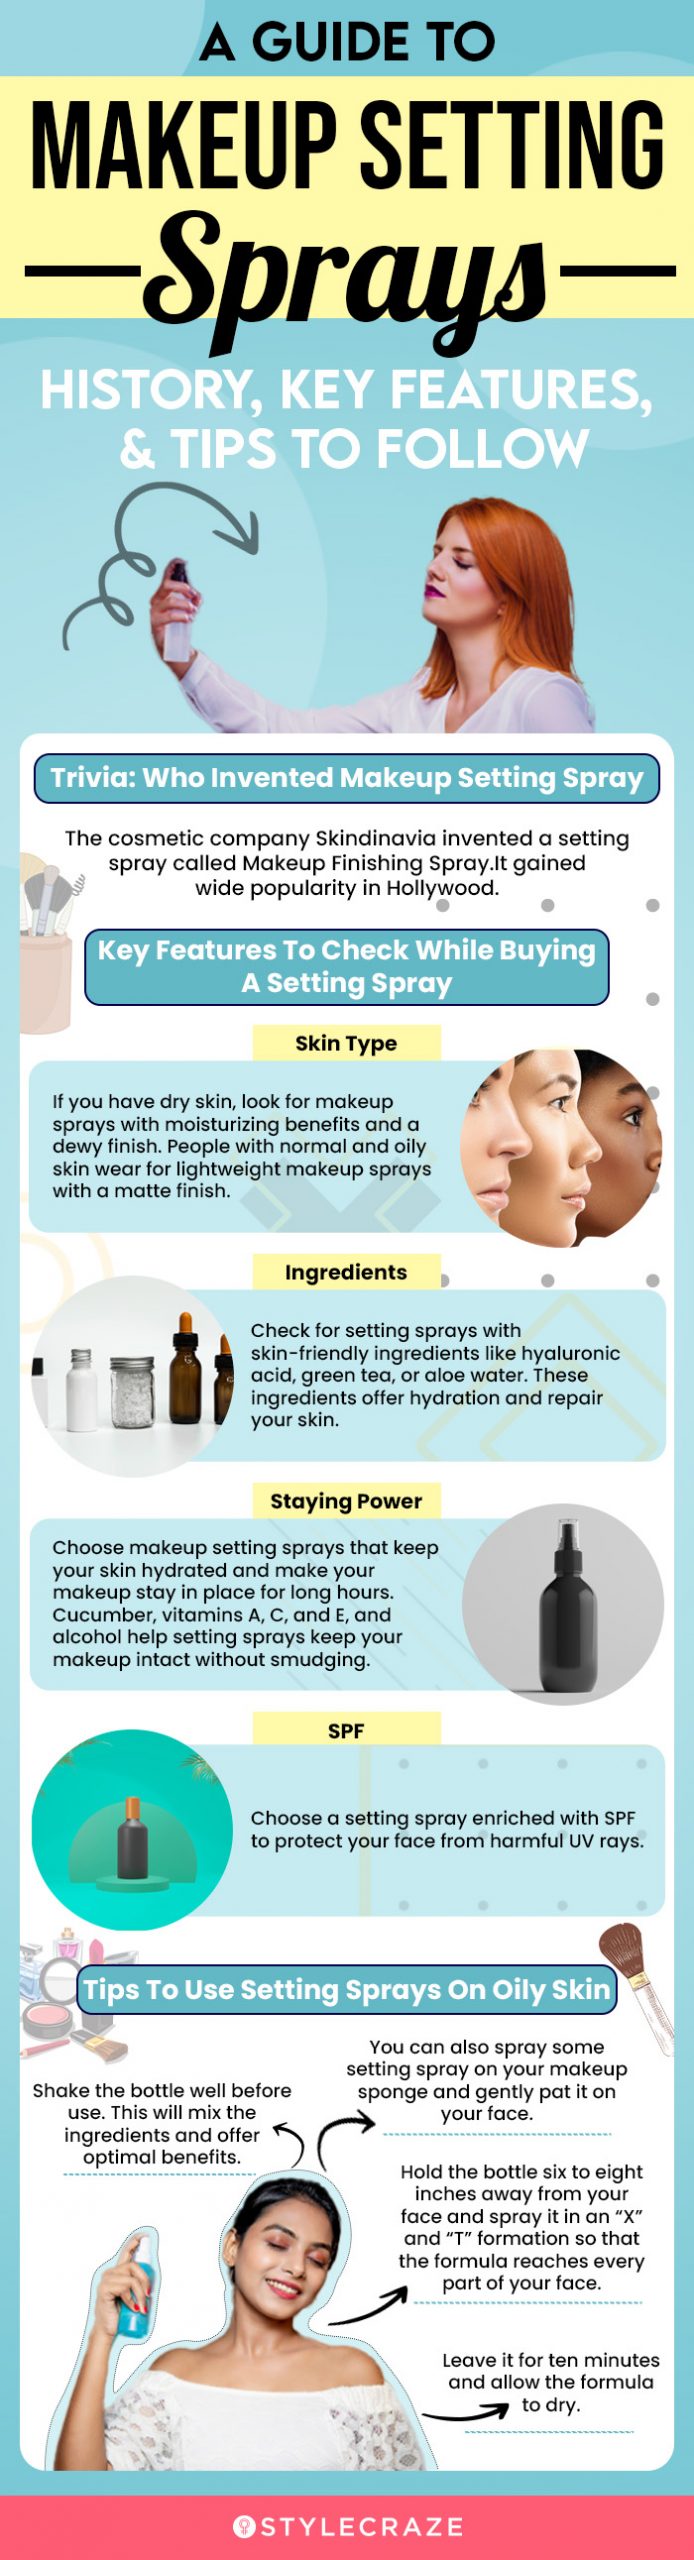 A Guide To Makeup Setting Sprays (infographic)